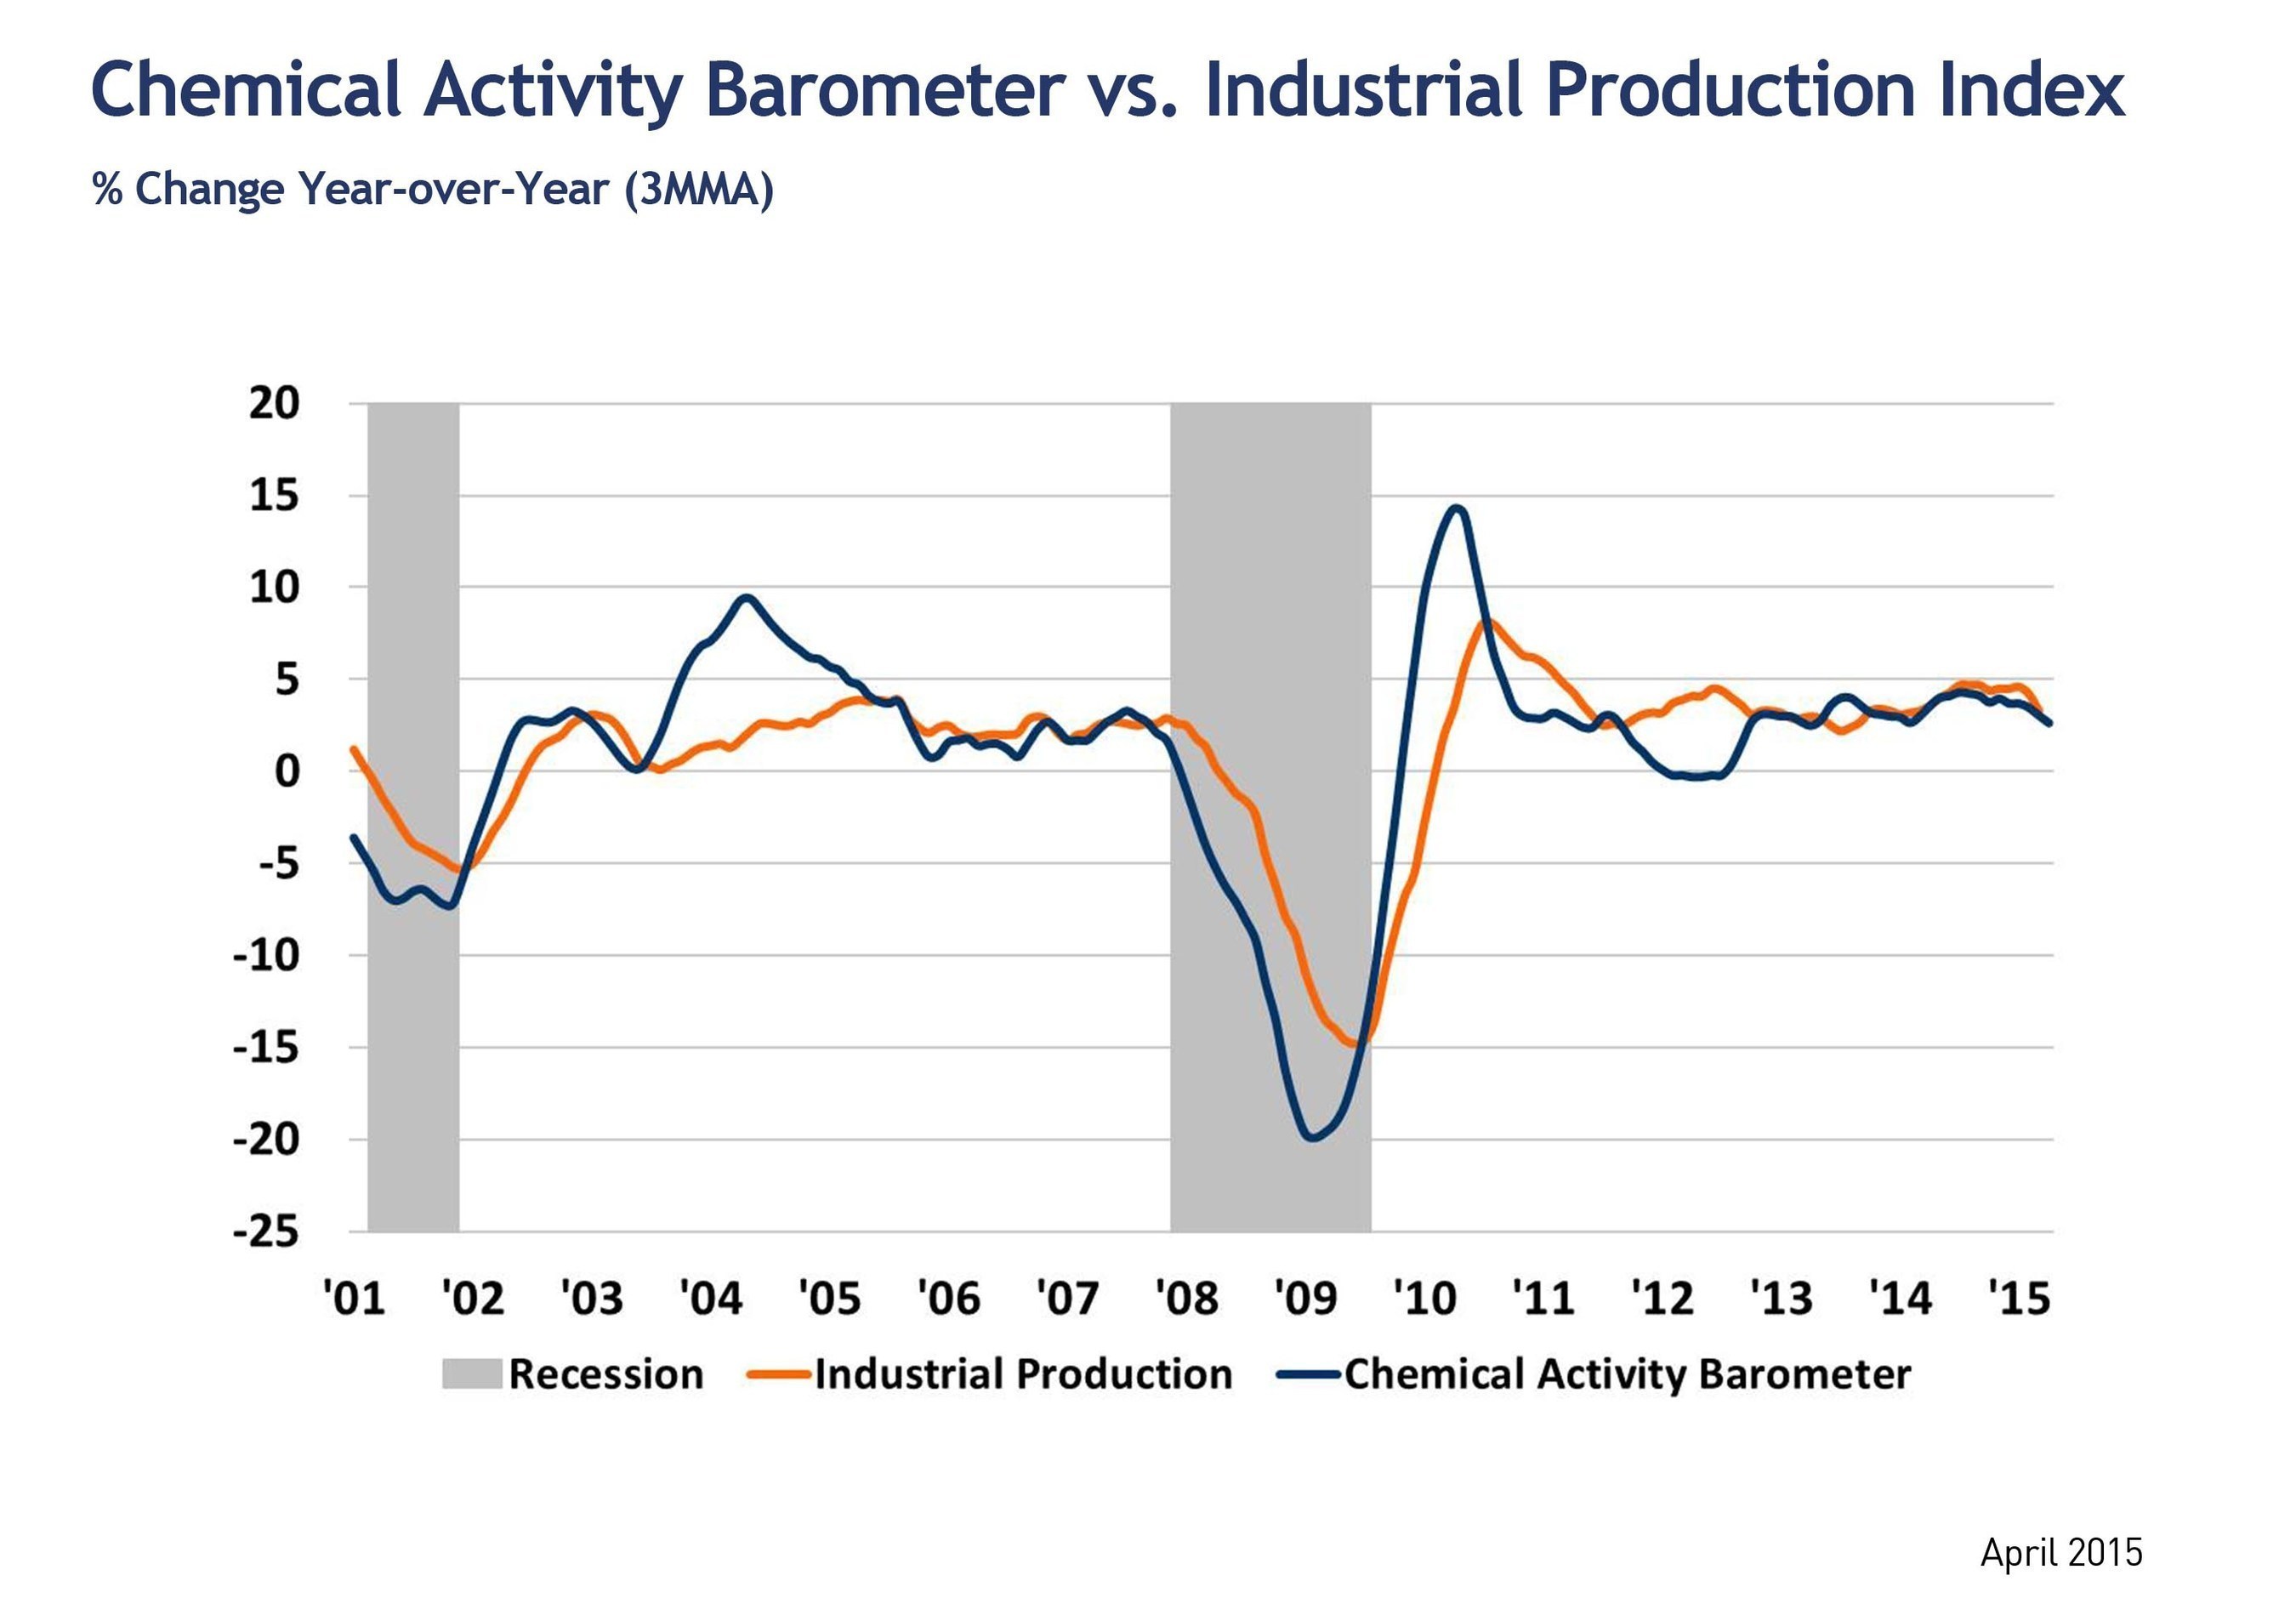 Leading Economic Indicator Reaches Seven Year High; Suggests Improving Business Activity